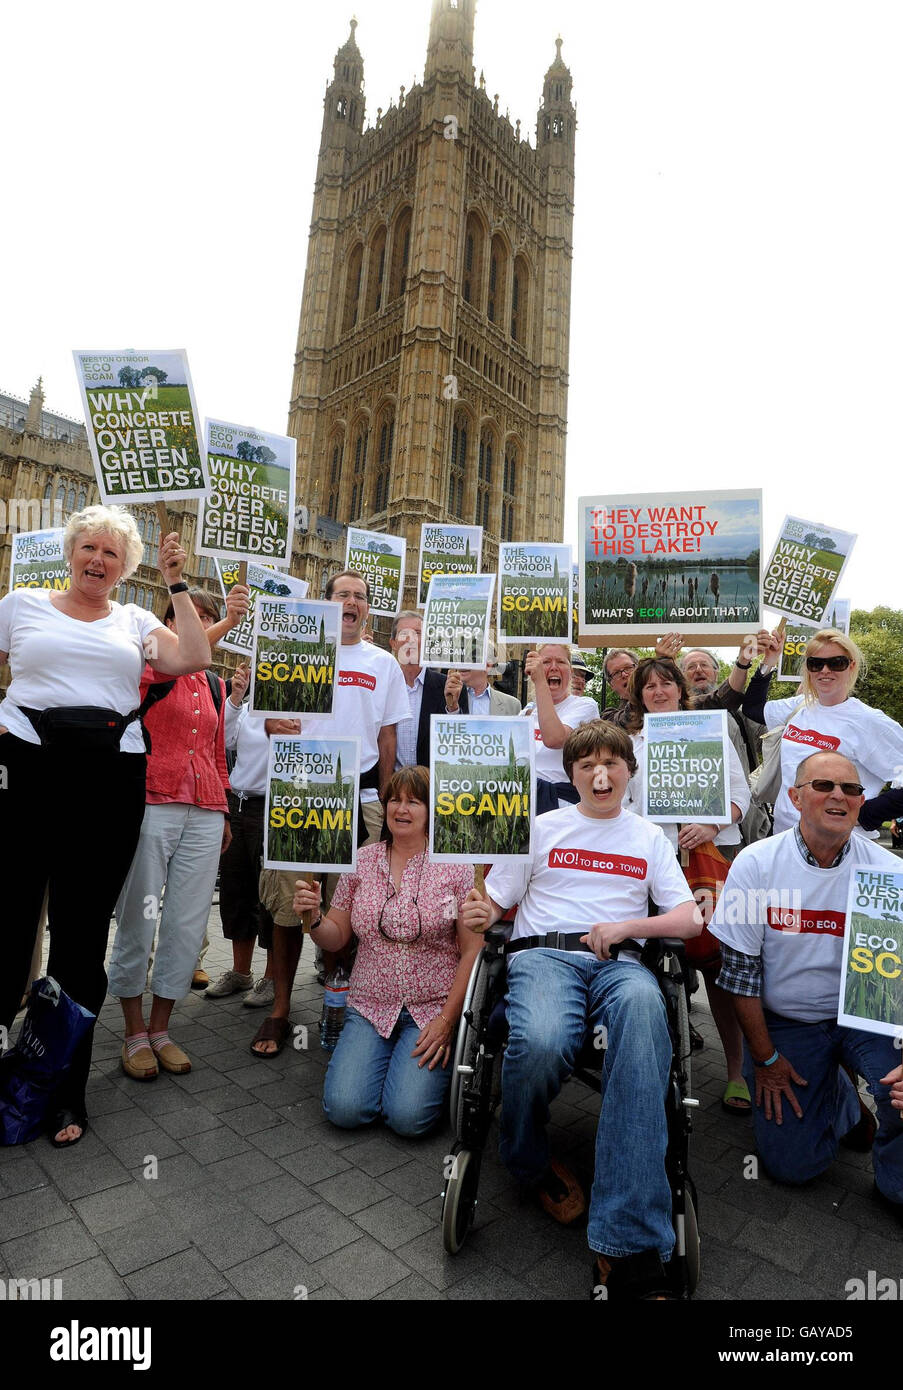 A group of protesters from Weston outside the Houses of Parliament, in London, voice their opposition for plans to build new eco-towns in their county of Oxfordshire. Stock Photo